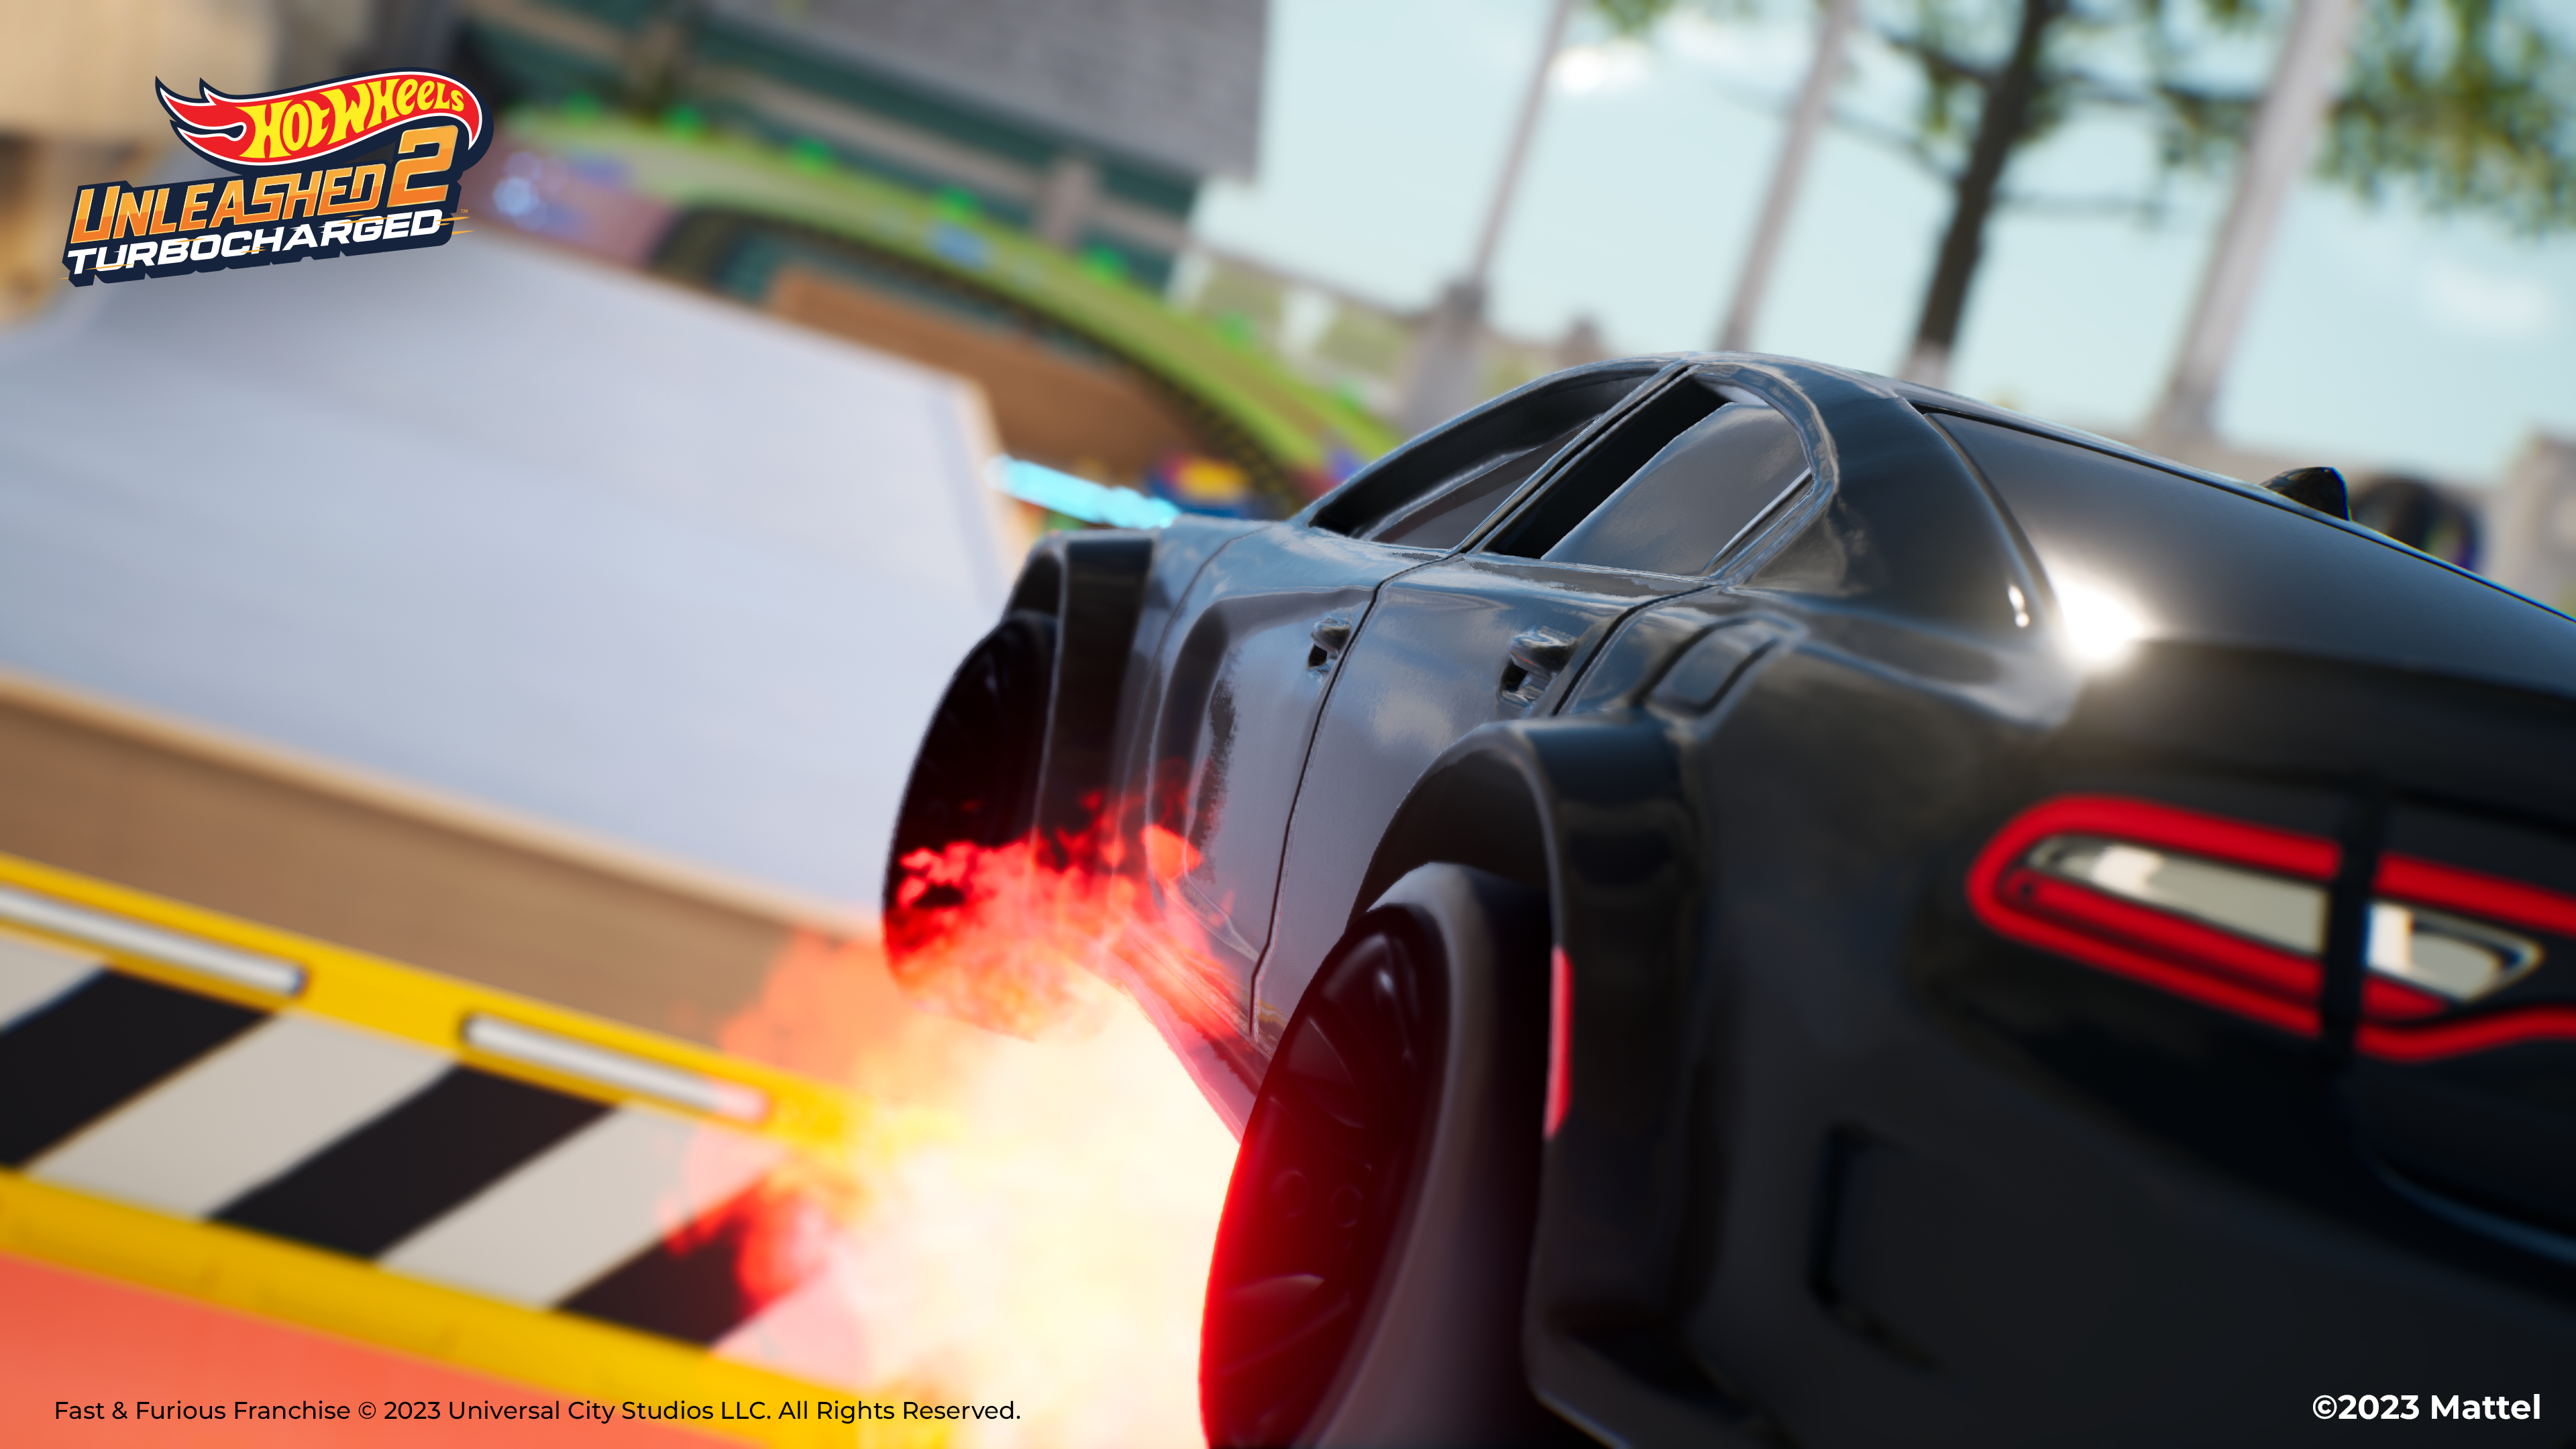 Hot Wheels Turbocharged Feature Cars & Furious Unleashed to 2: Fast